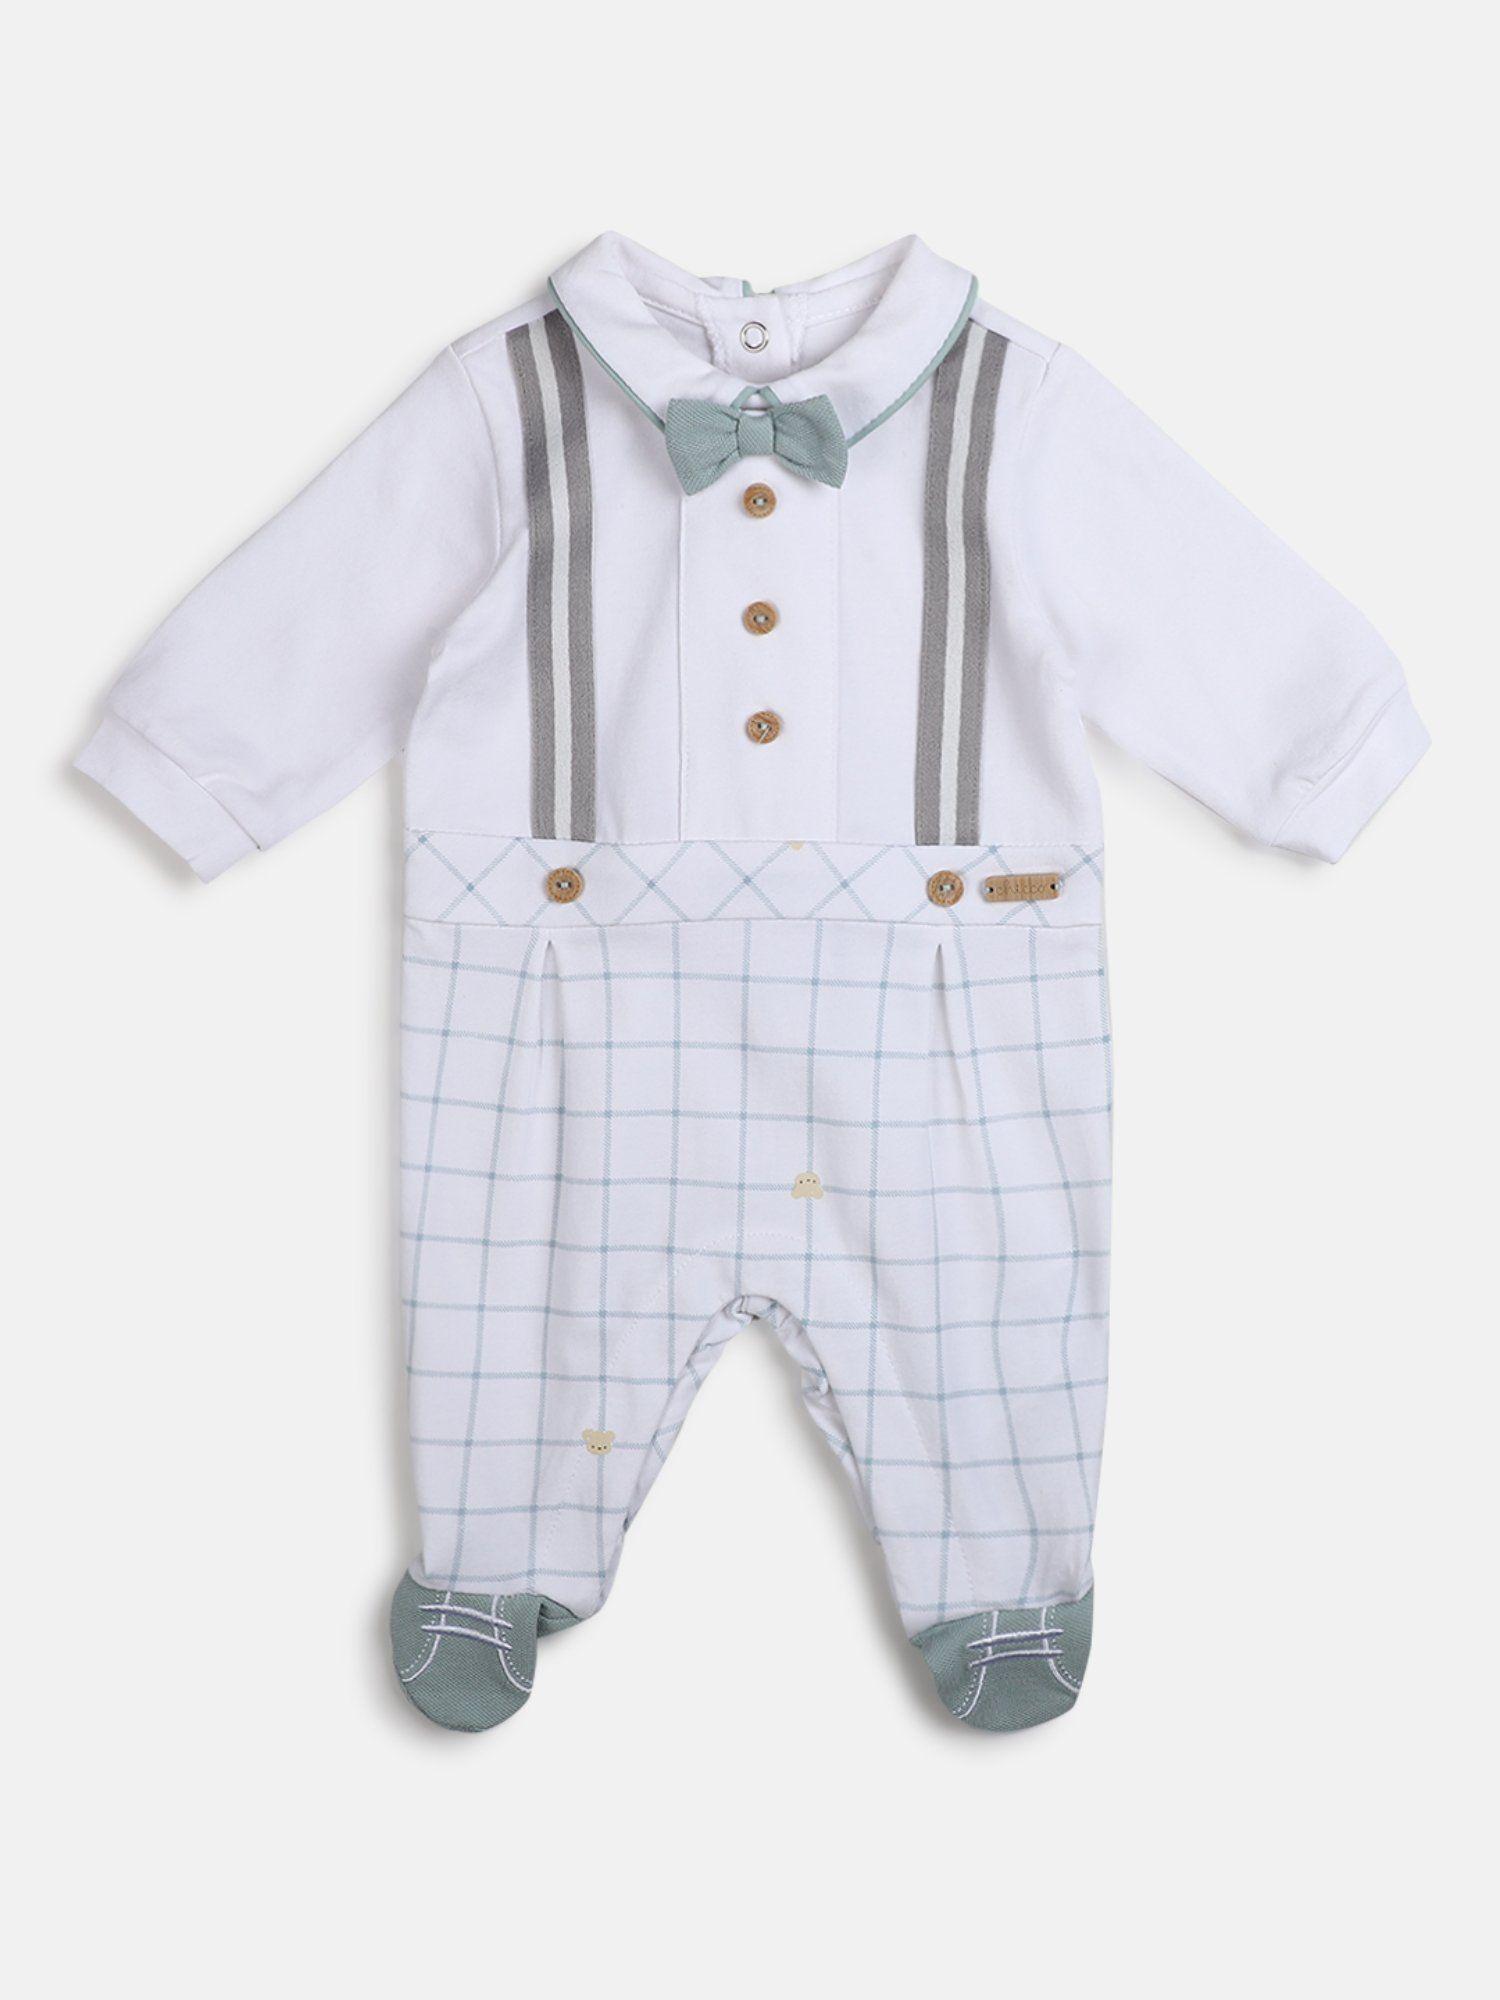 boys-white-stretch-leg-opening-rompers-with-bow-tie-(set-of-2)